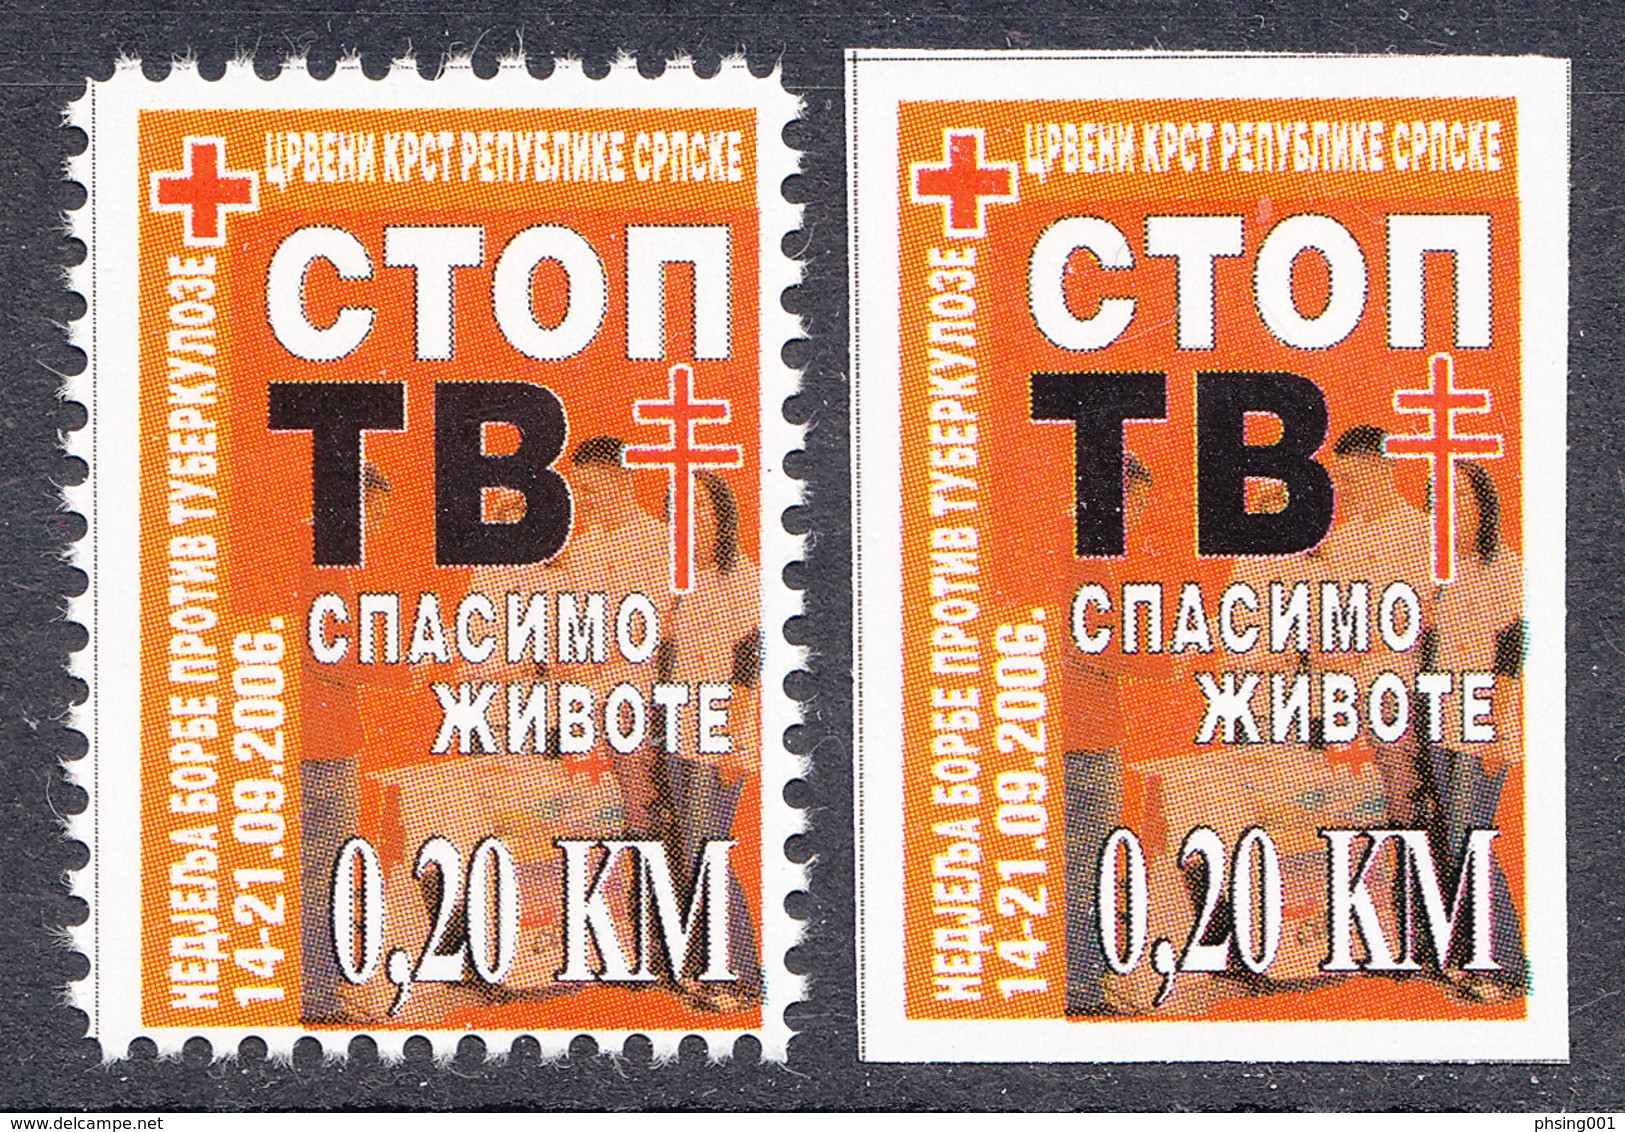 Bosnia Serbia 2006 TBC, Red Cross Rotes Kreuz Croix Rouge, Tax Charity Surcharge, Perforated + Imperforated Stamp MNH - Bosnie-Herzegovine